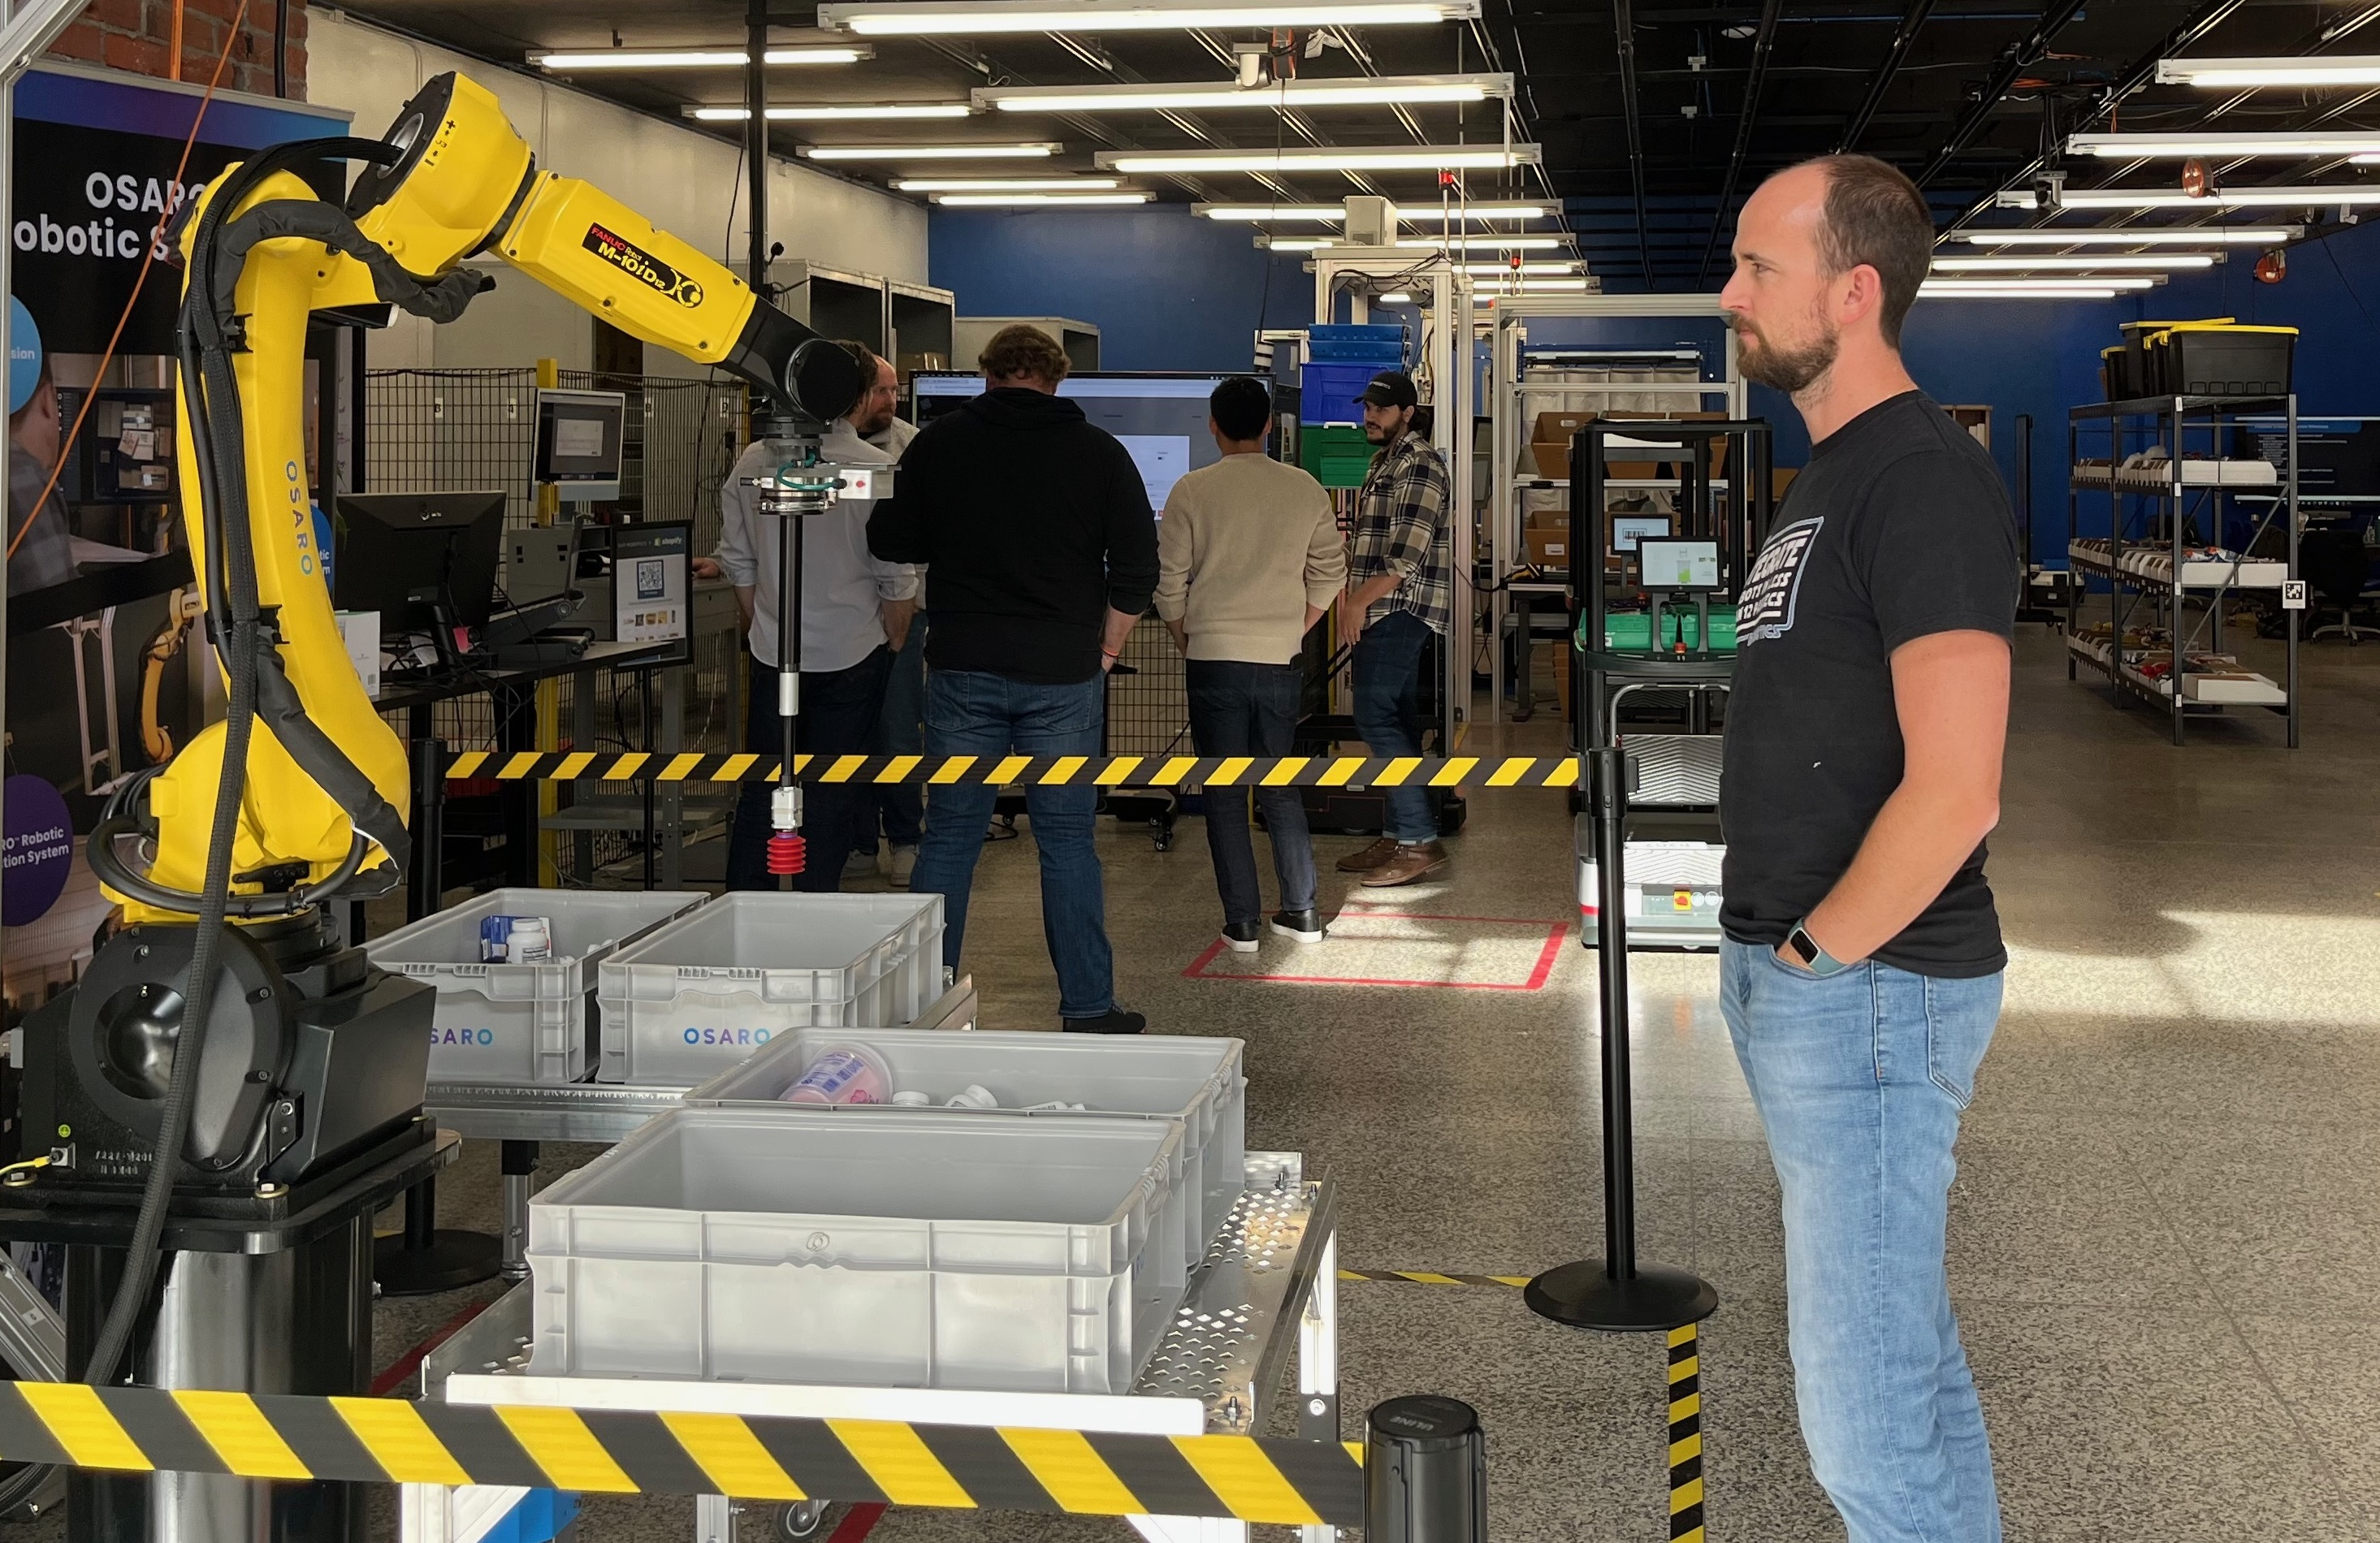 Prospective customers can engage with an OSARO pick-and-place robot cell at SVT's Innovation Lab in Norfolk, Virginia, where they can see a live demo and learn more about the possibilities for advanced e-commerce automation.